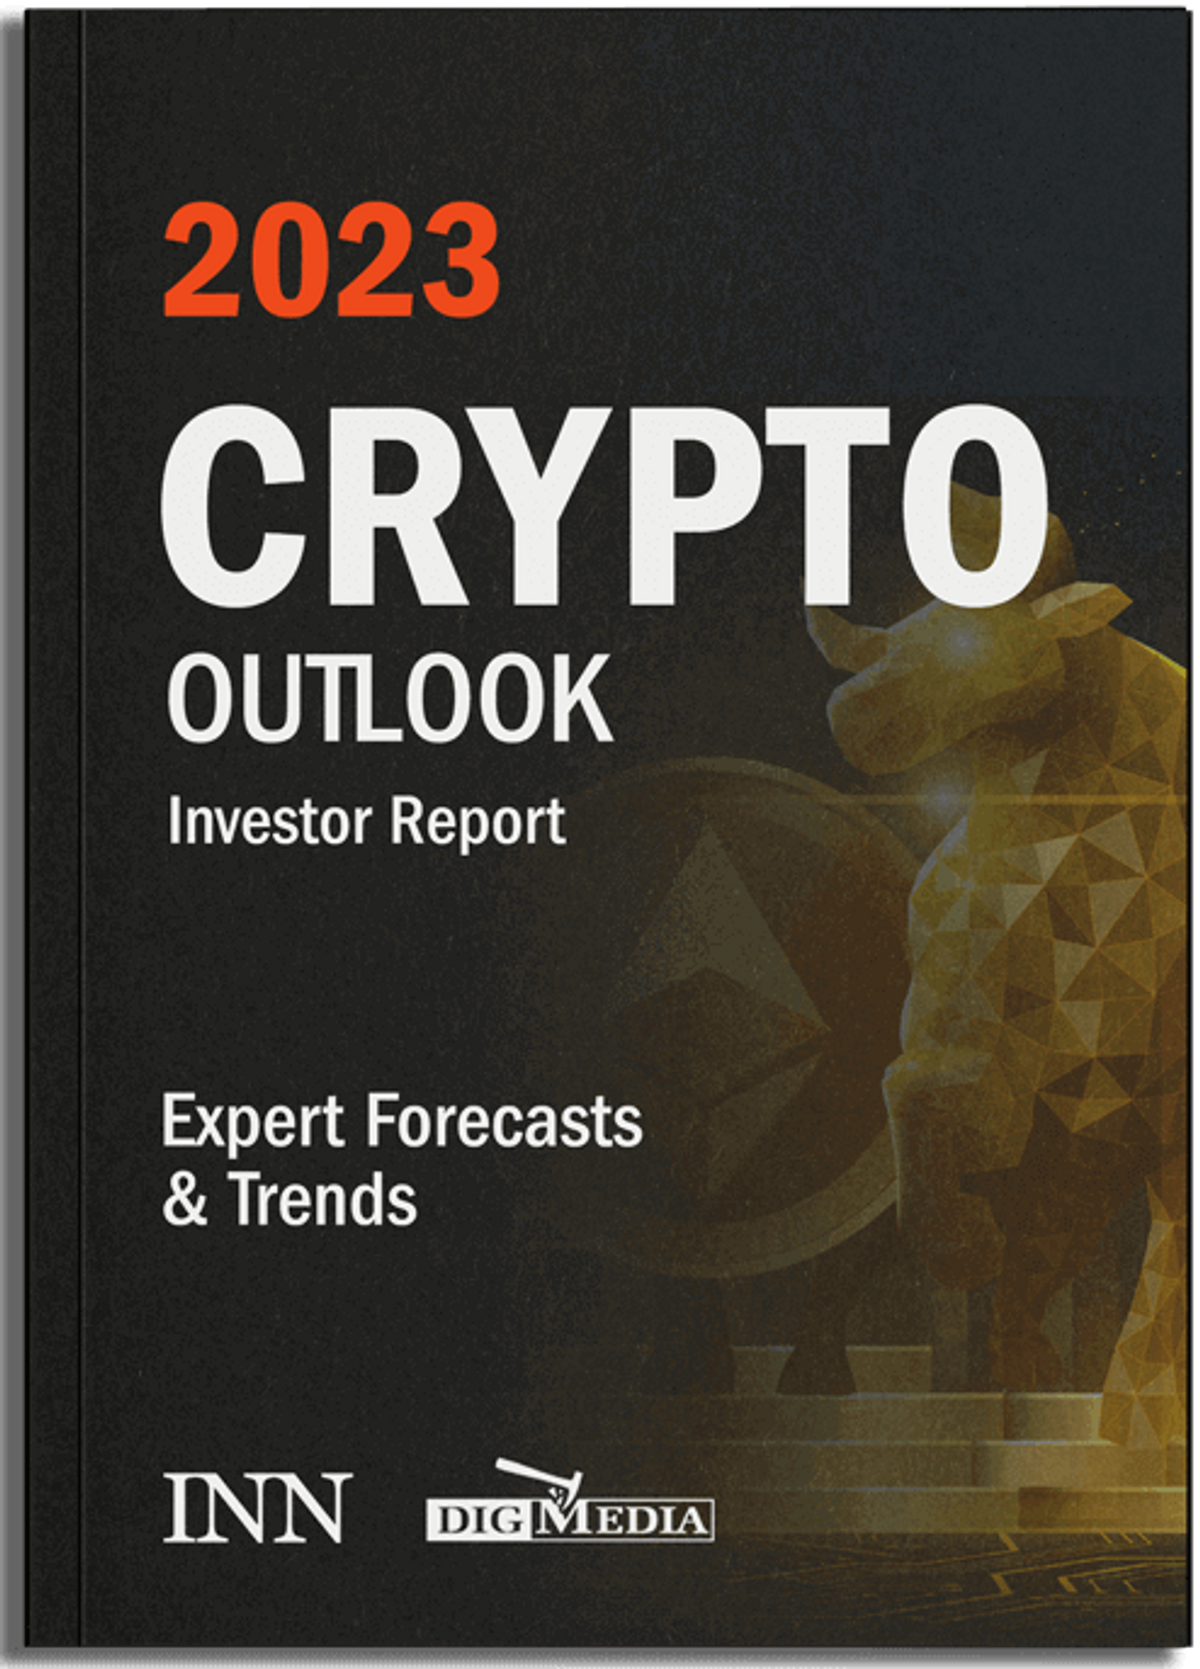 2023 Crypto Outlook Report 